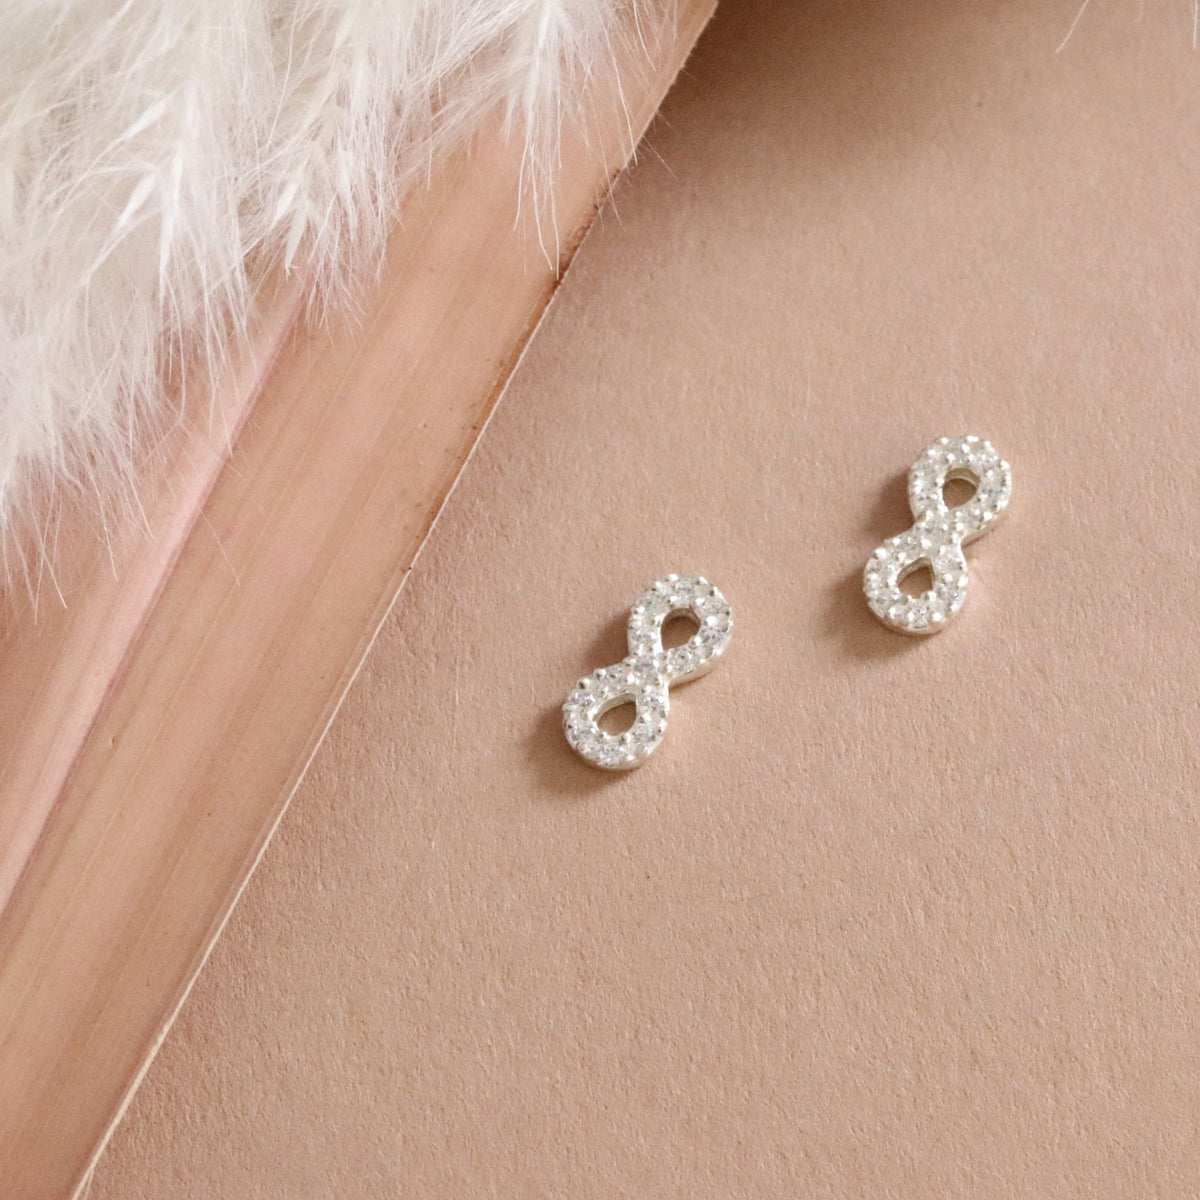 LOVE INFINITY STUDS - CUBIC ZIRCONIA &amp; SILVER - SO PRETTY CARA COTTER